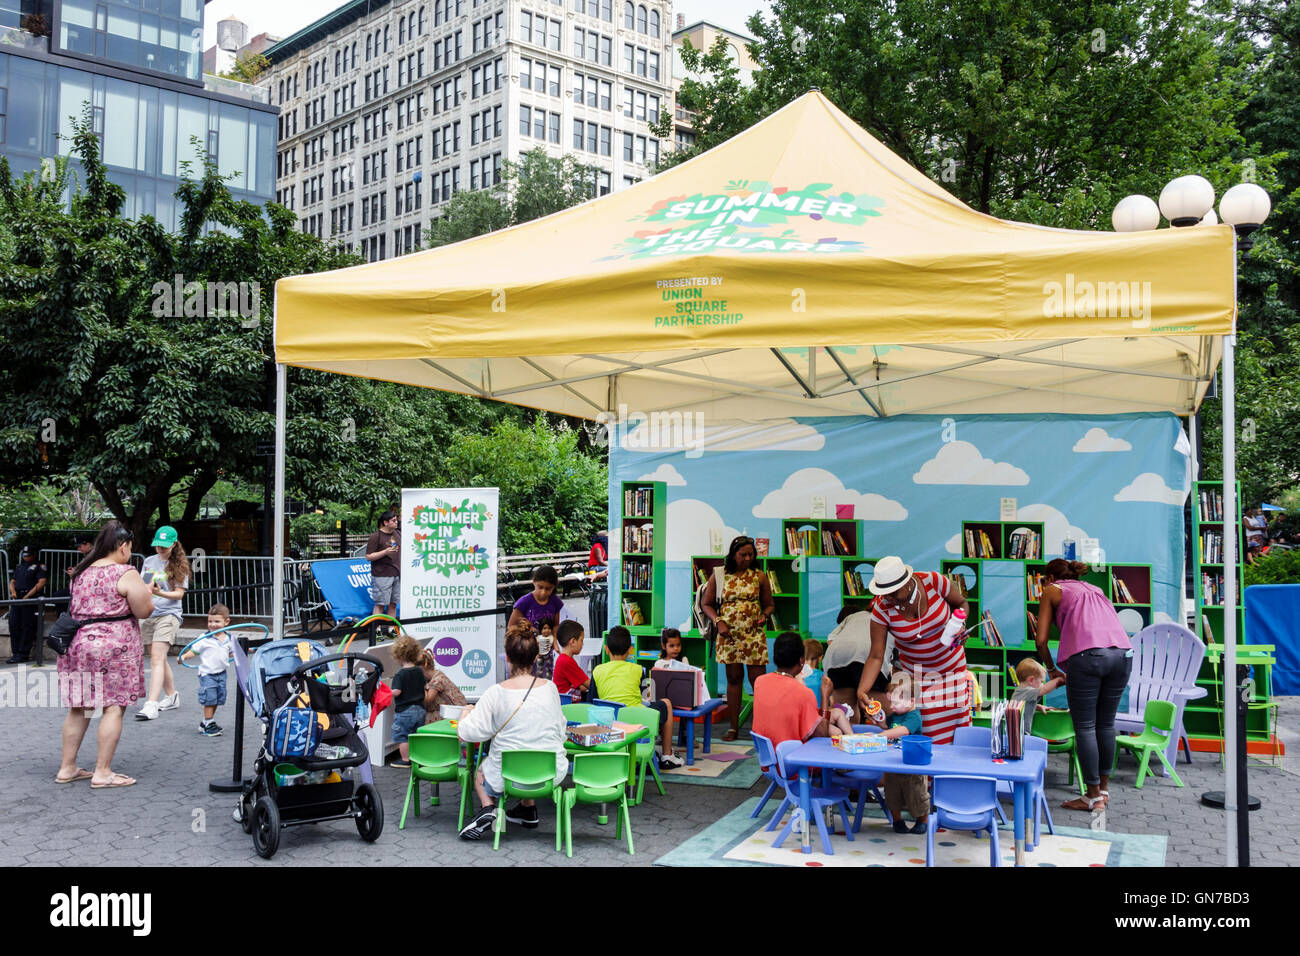 New York City,NY NYC Manhattan,Midtown,Union Square Park,public park,Summer in the Square,weekly entertainment series,activities,Children's Pavilion,p Stock Photo